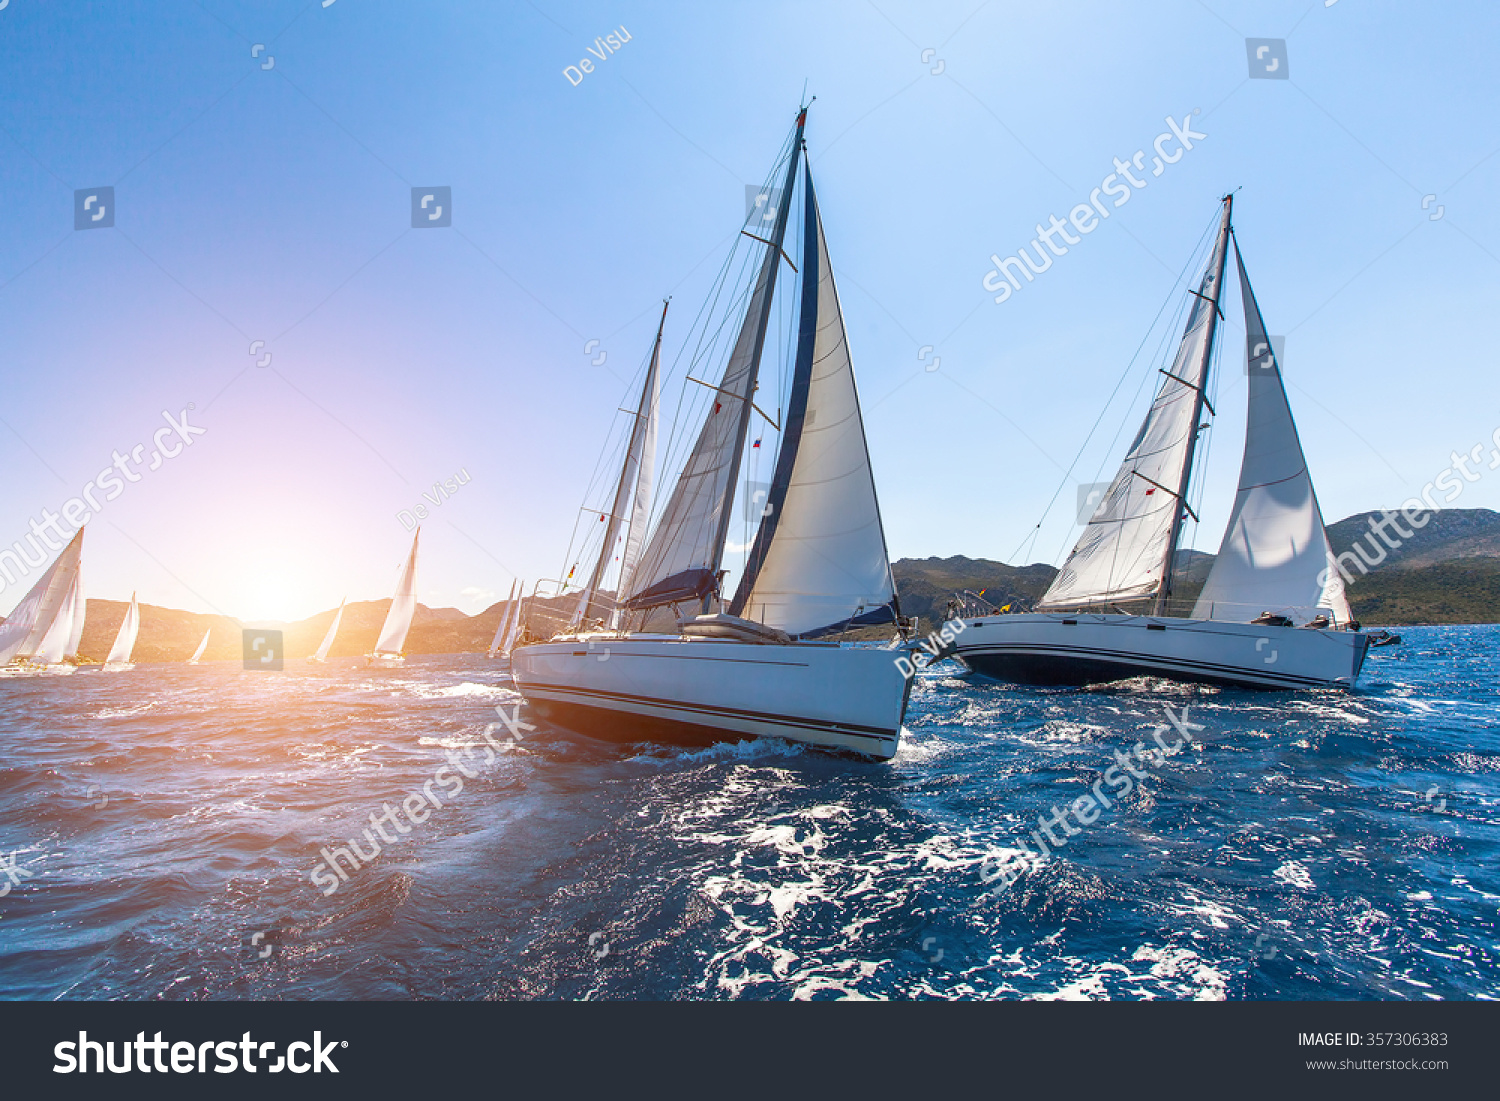 Luxury yachts at Sailing regatta. Sailing in the wind through the waves at the Sea.  #357306383